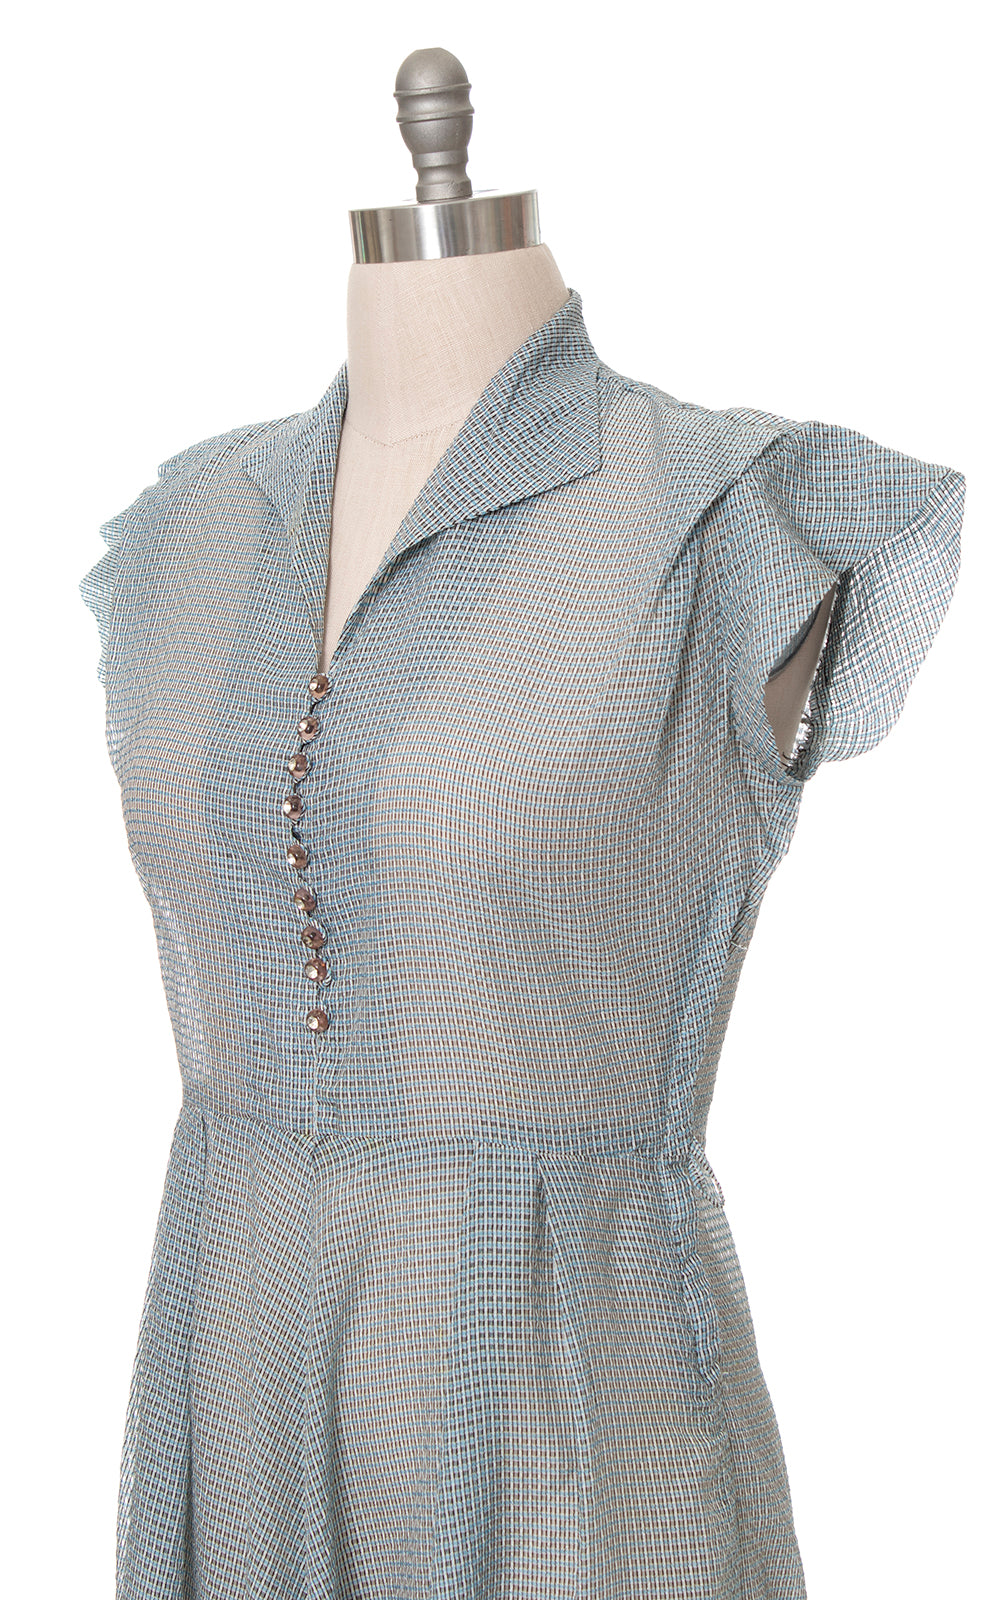 1940s 1950s Sheer Plaid Shirtwaist Dress with Rhinestone Buttons | large